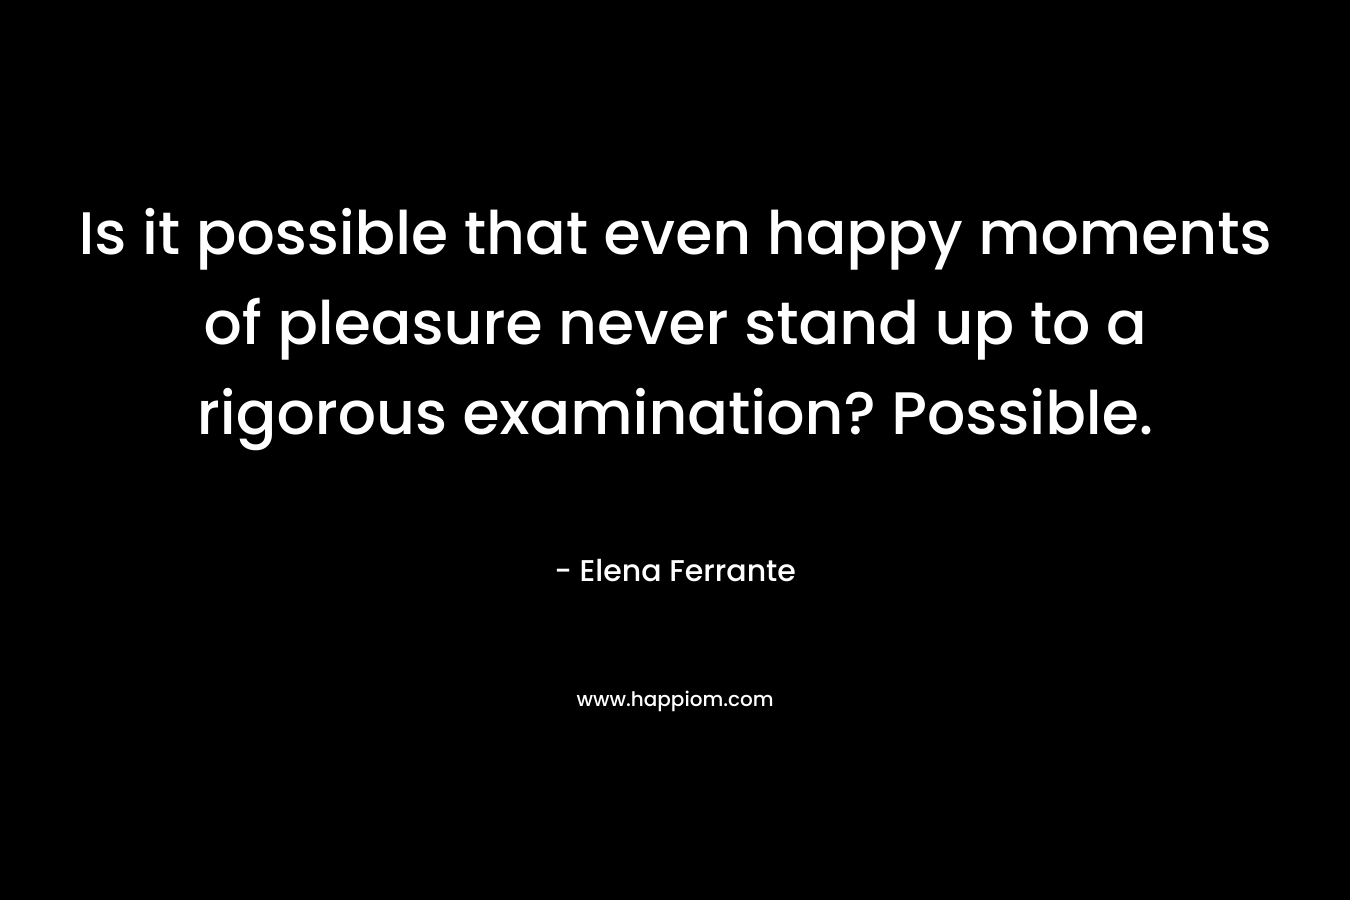 Is it possible that even happy moments of pleasure never stand up to a rigorous examination? Possible. – Elena Ferrante